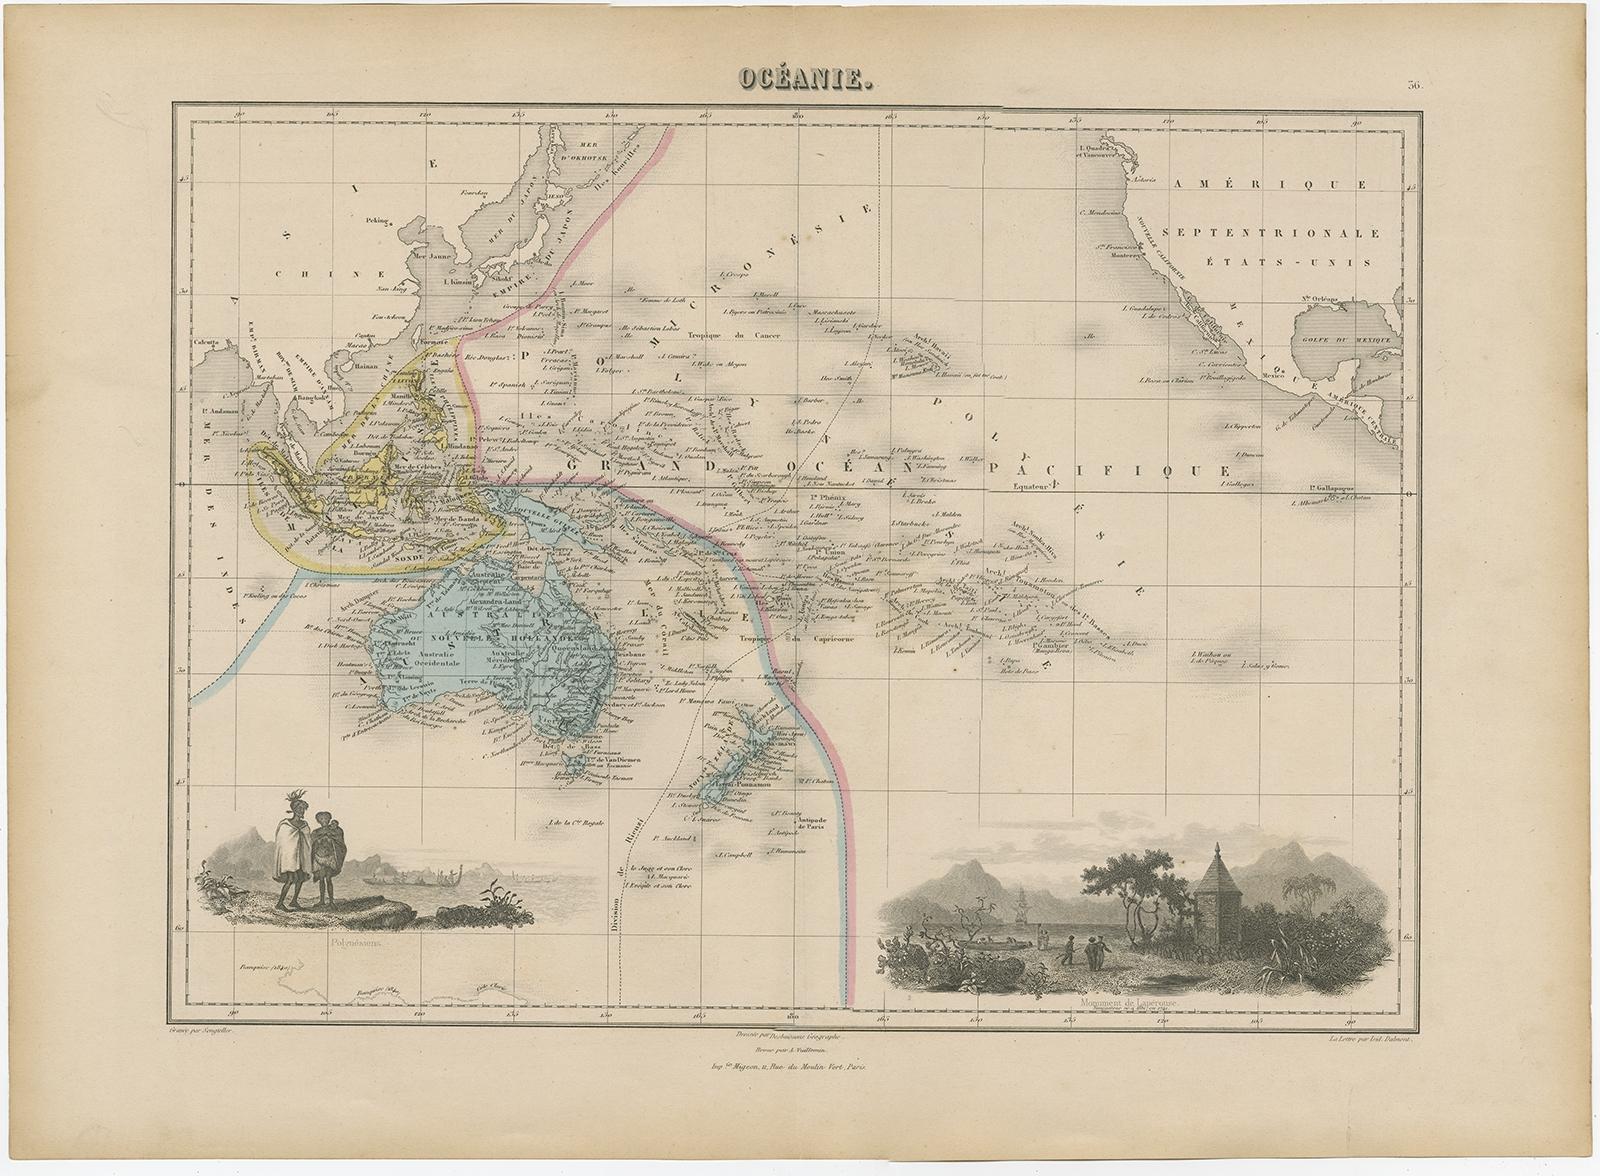 Antique map titled 'Océanie'. 

Old map of the oceans around Australia, Indonesia and New Zealand. With vignettes of people from Polynesia and the old monument Laparouse. This map originates from 'Géographie Universelle Atlas-Migeon' by J.